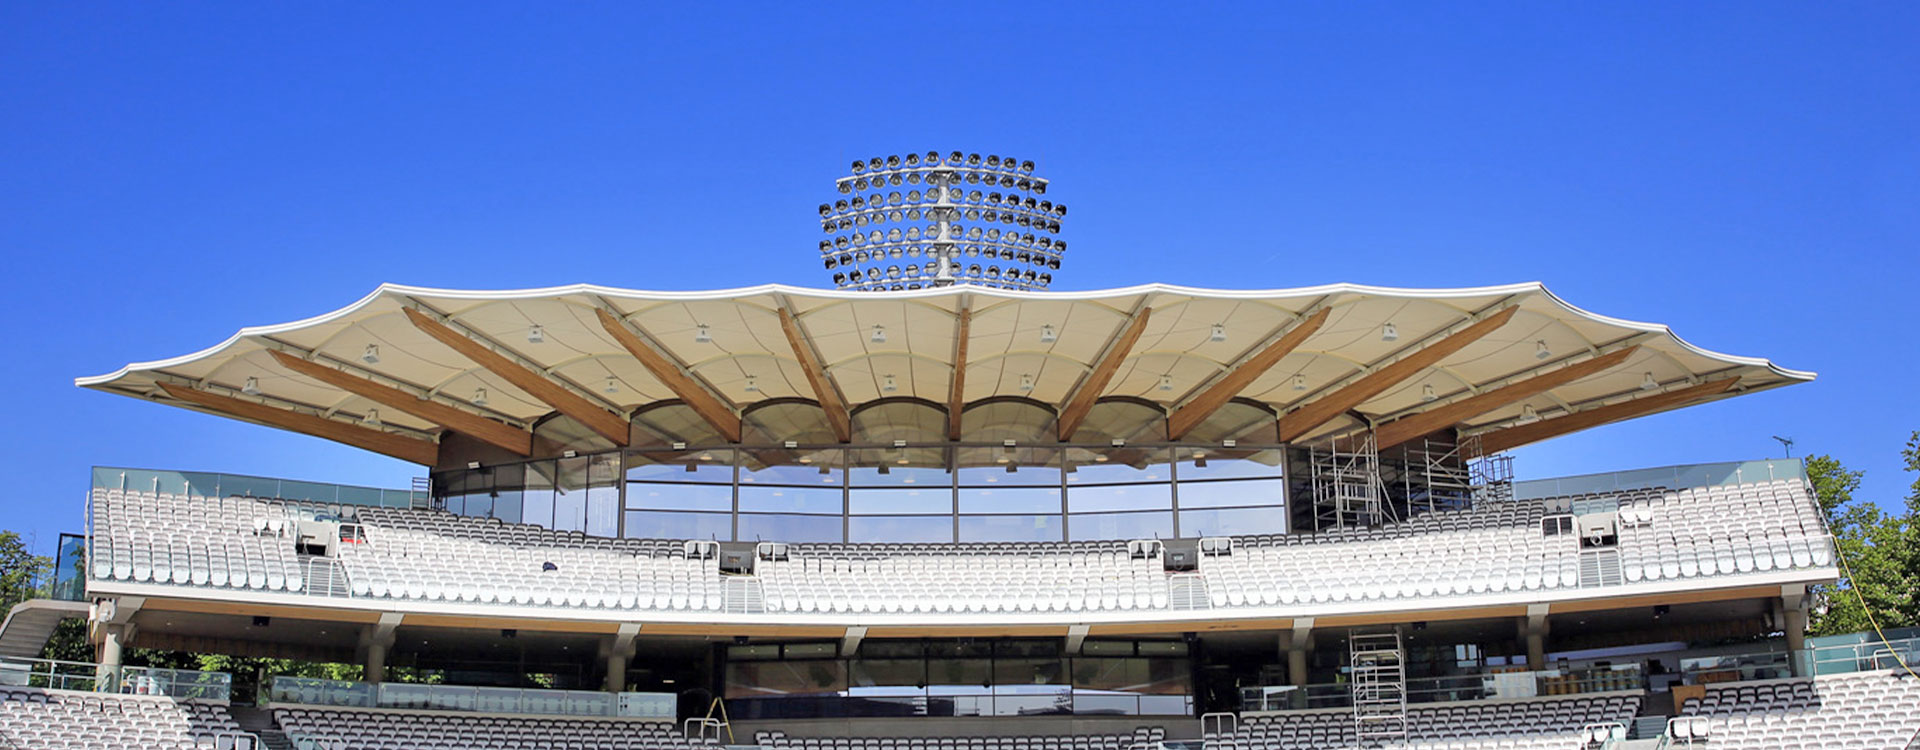 Warner Stand at Lords is an example of Timber and Membrane Structures